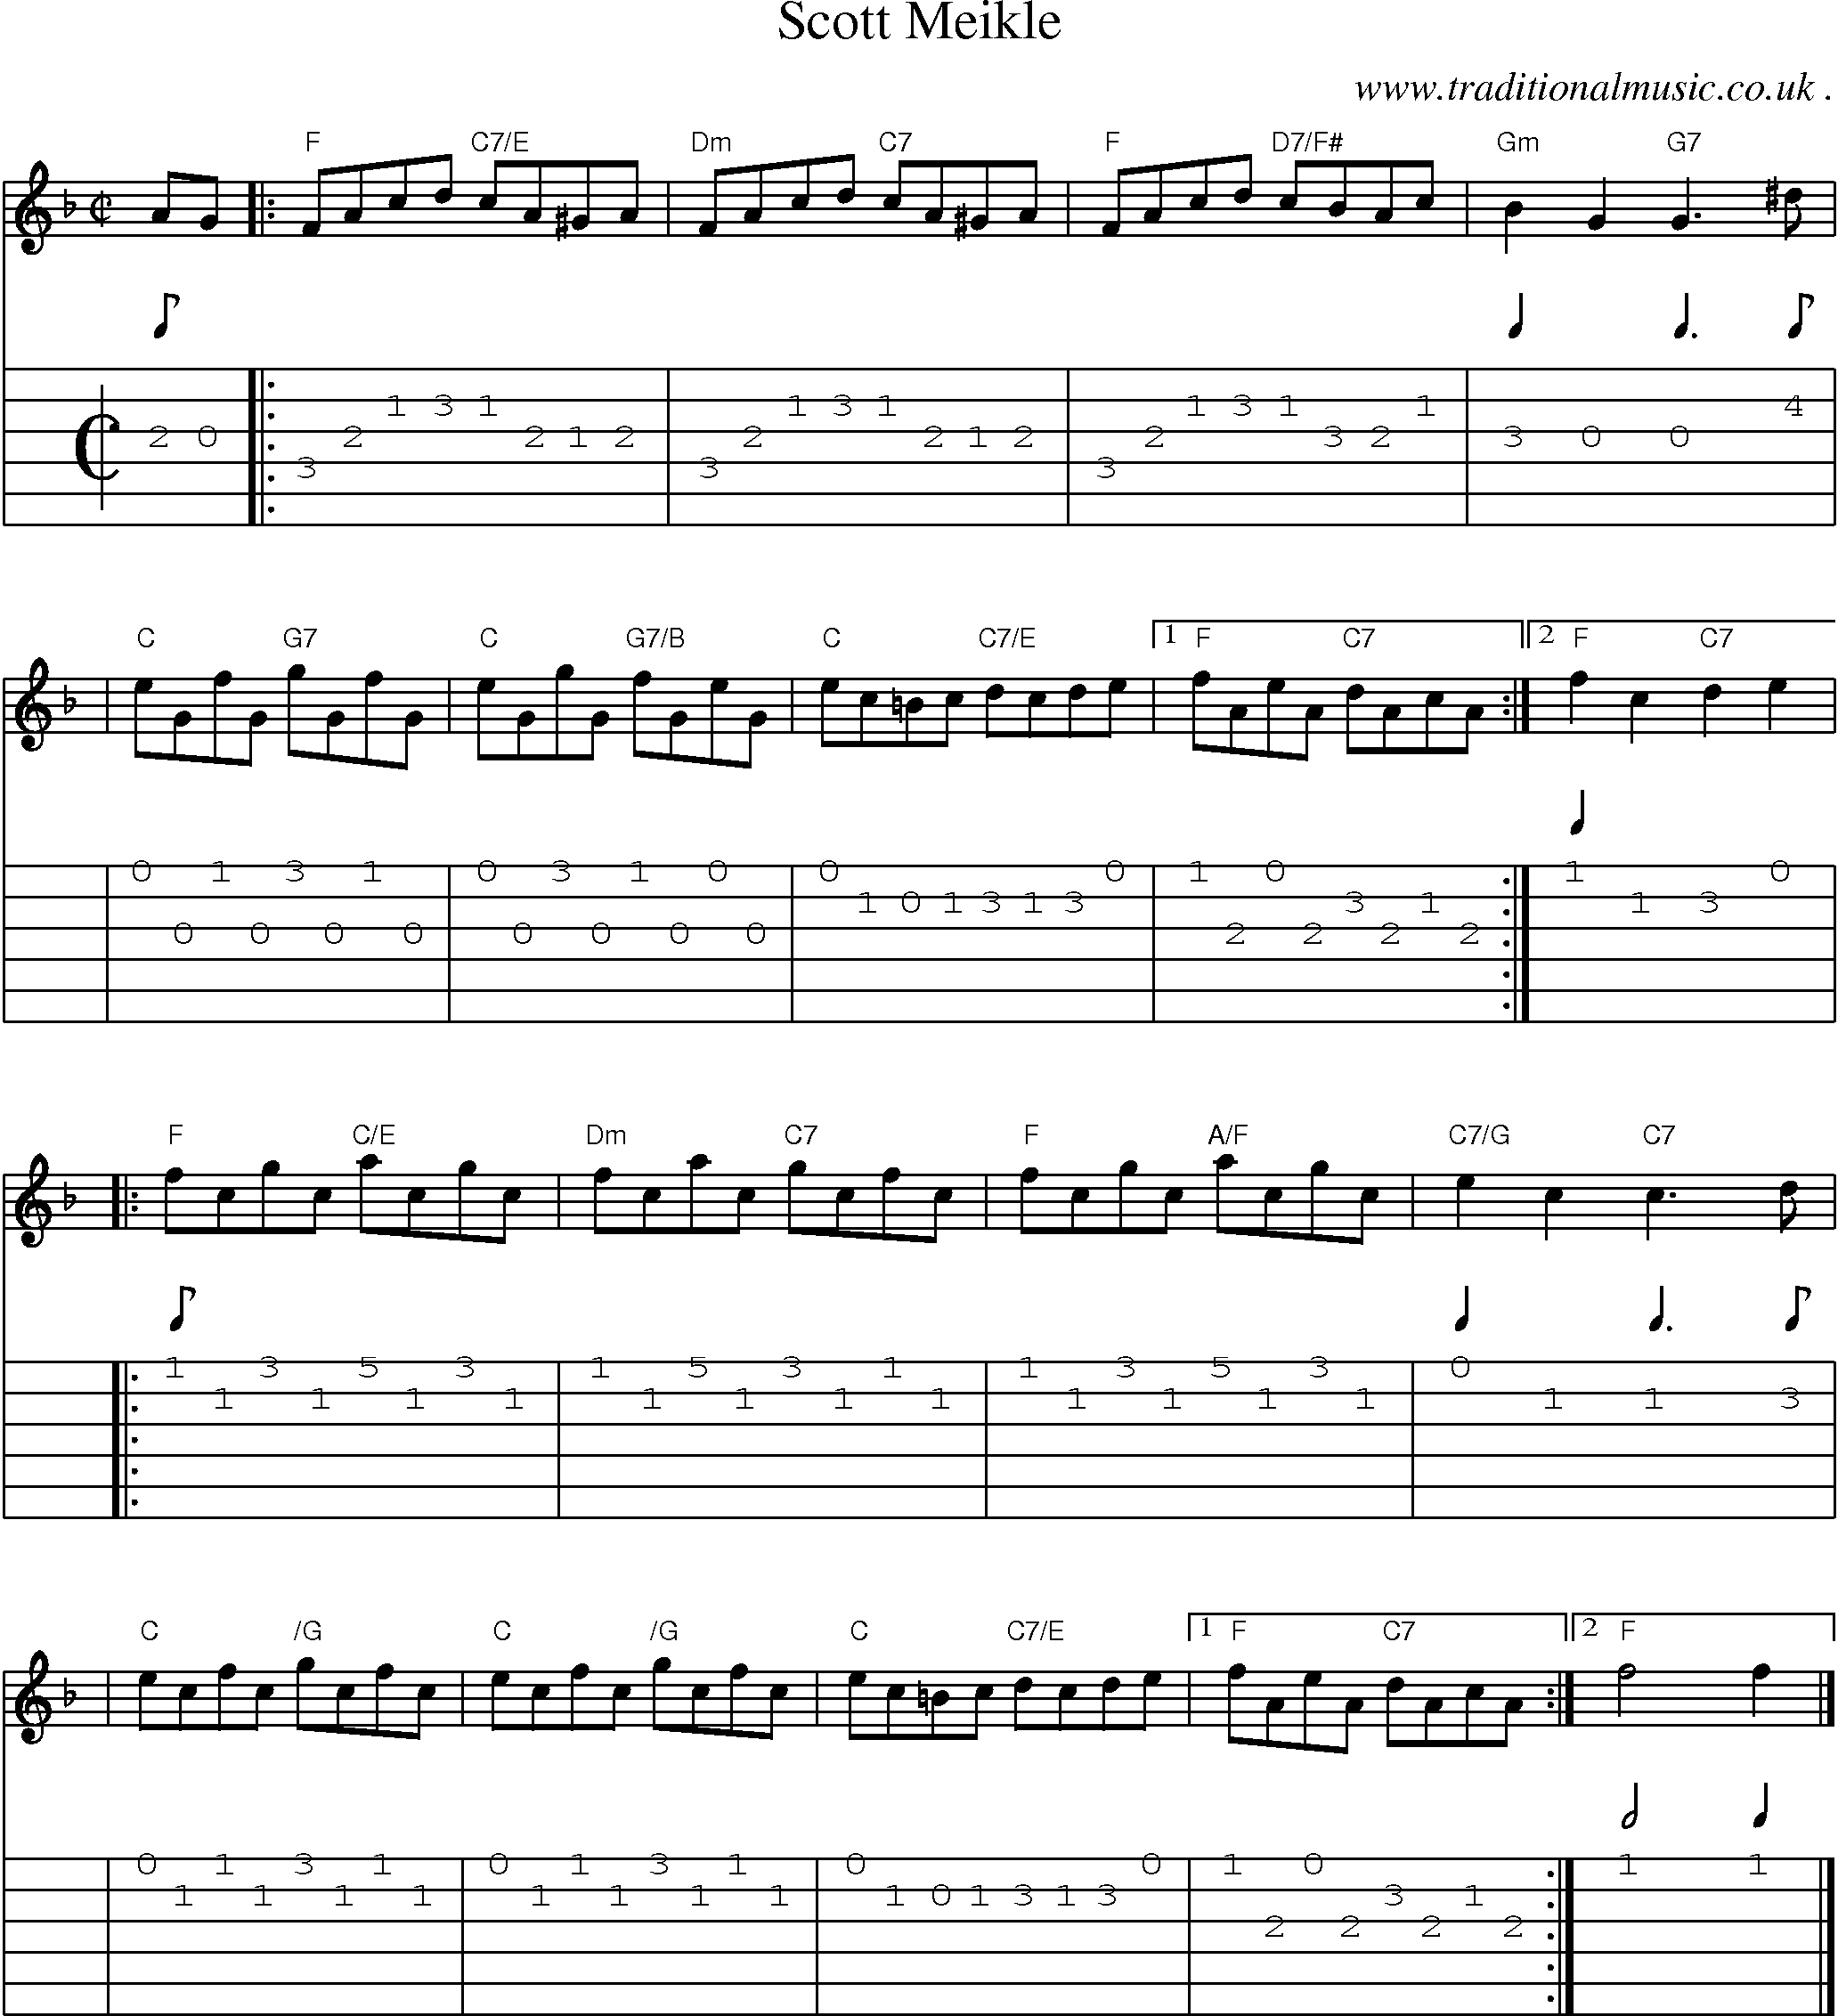 Sheet-music  score, Chords and Guitar Tabs for Scott Meikle